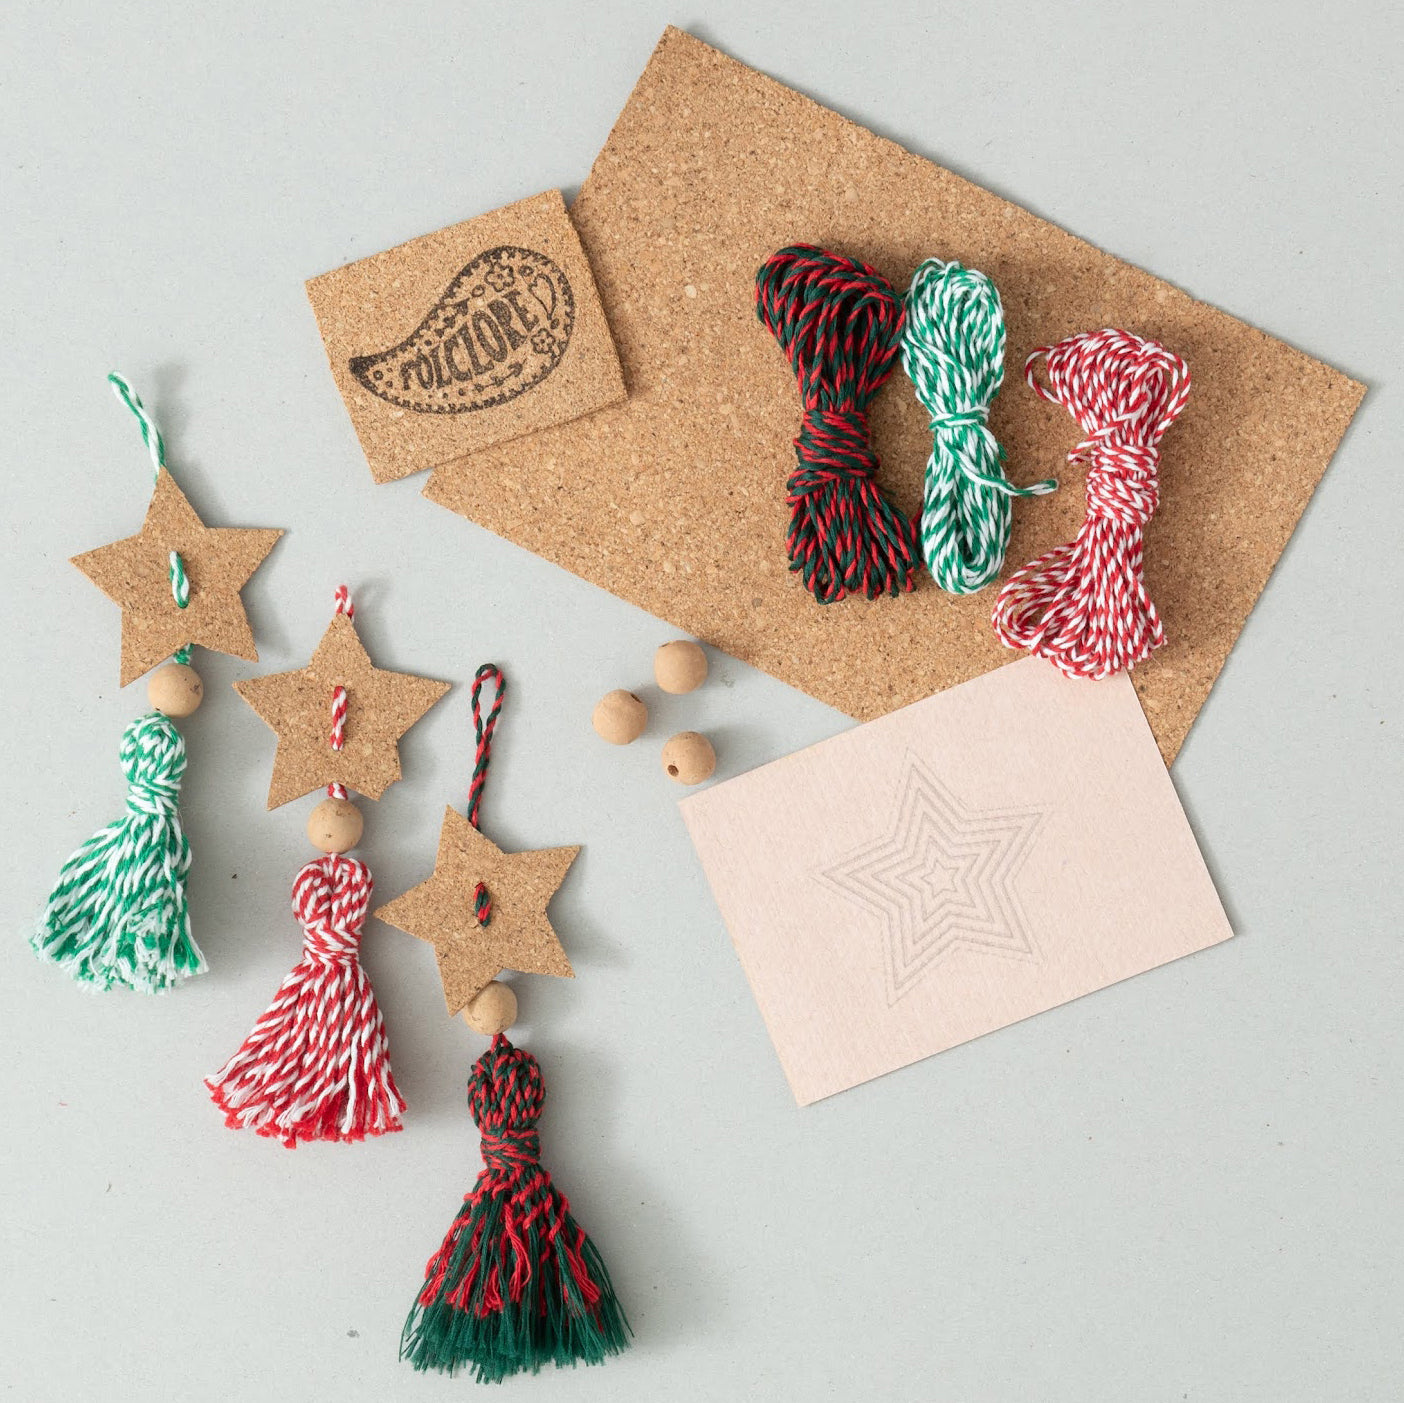 folclore crafts unique Christmas project make cork and twine bakers tassels